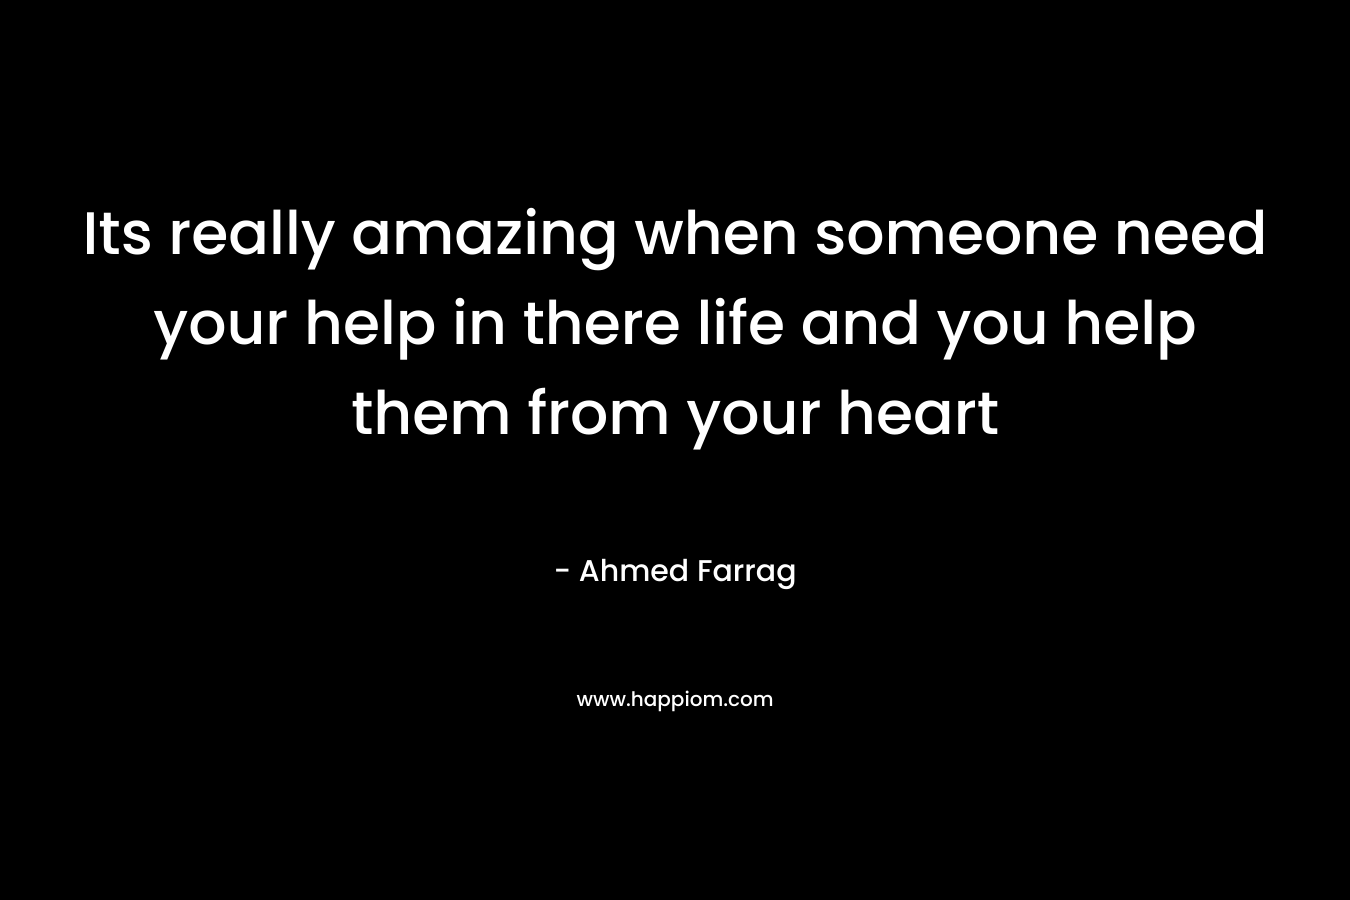 Its really amazing when someone need your help in there life and you help them from your heart